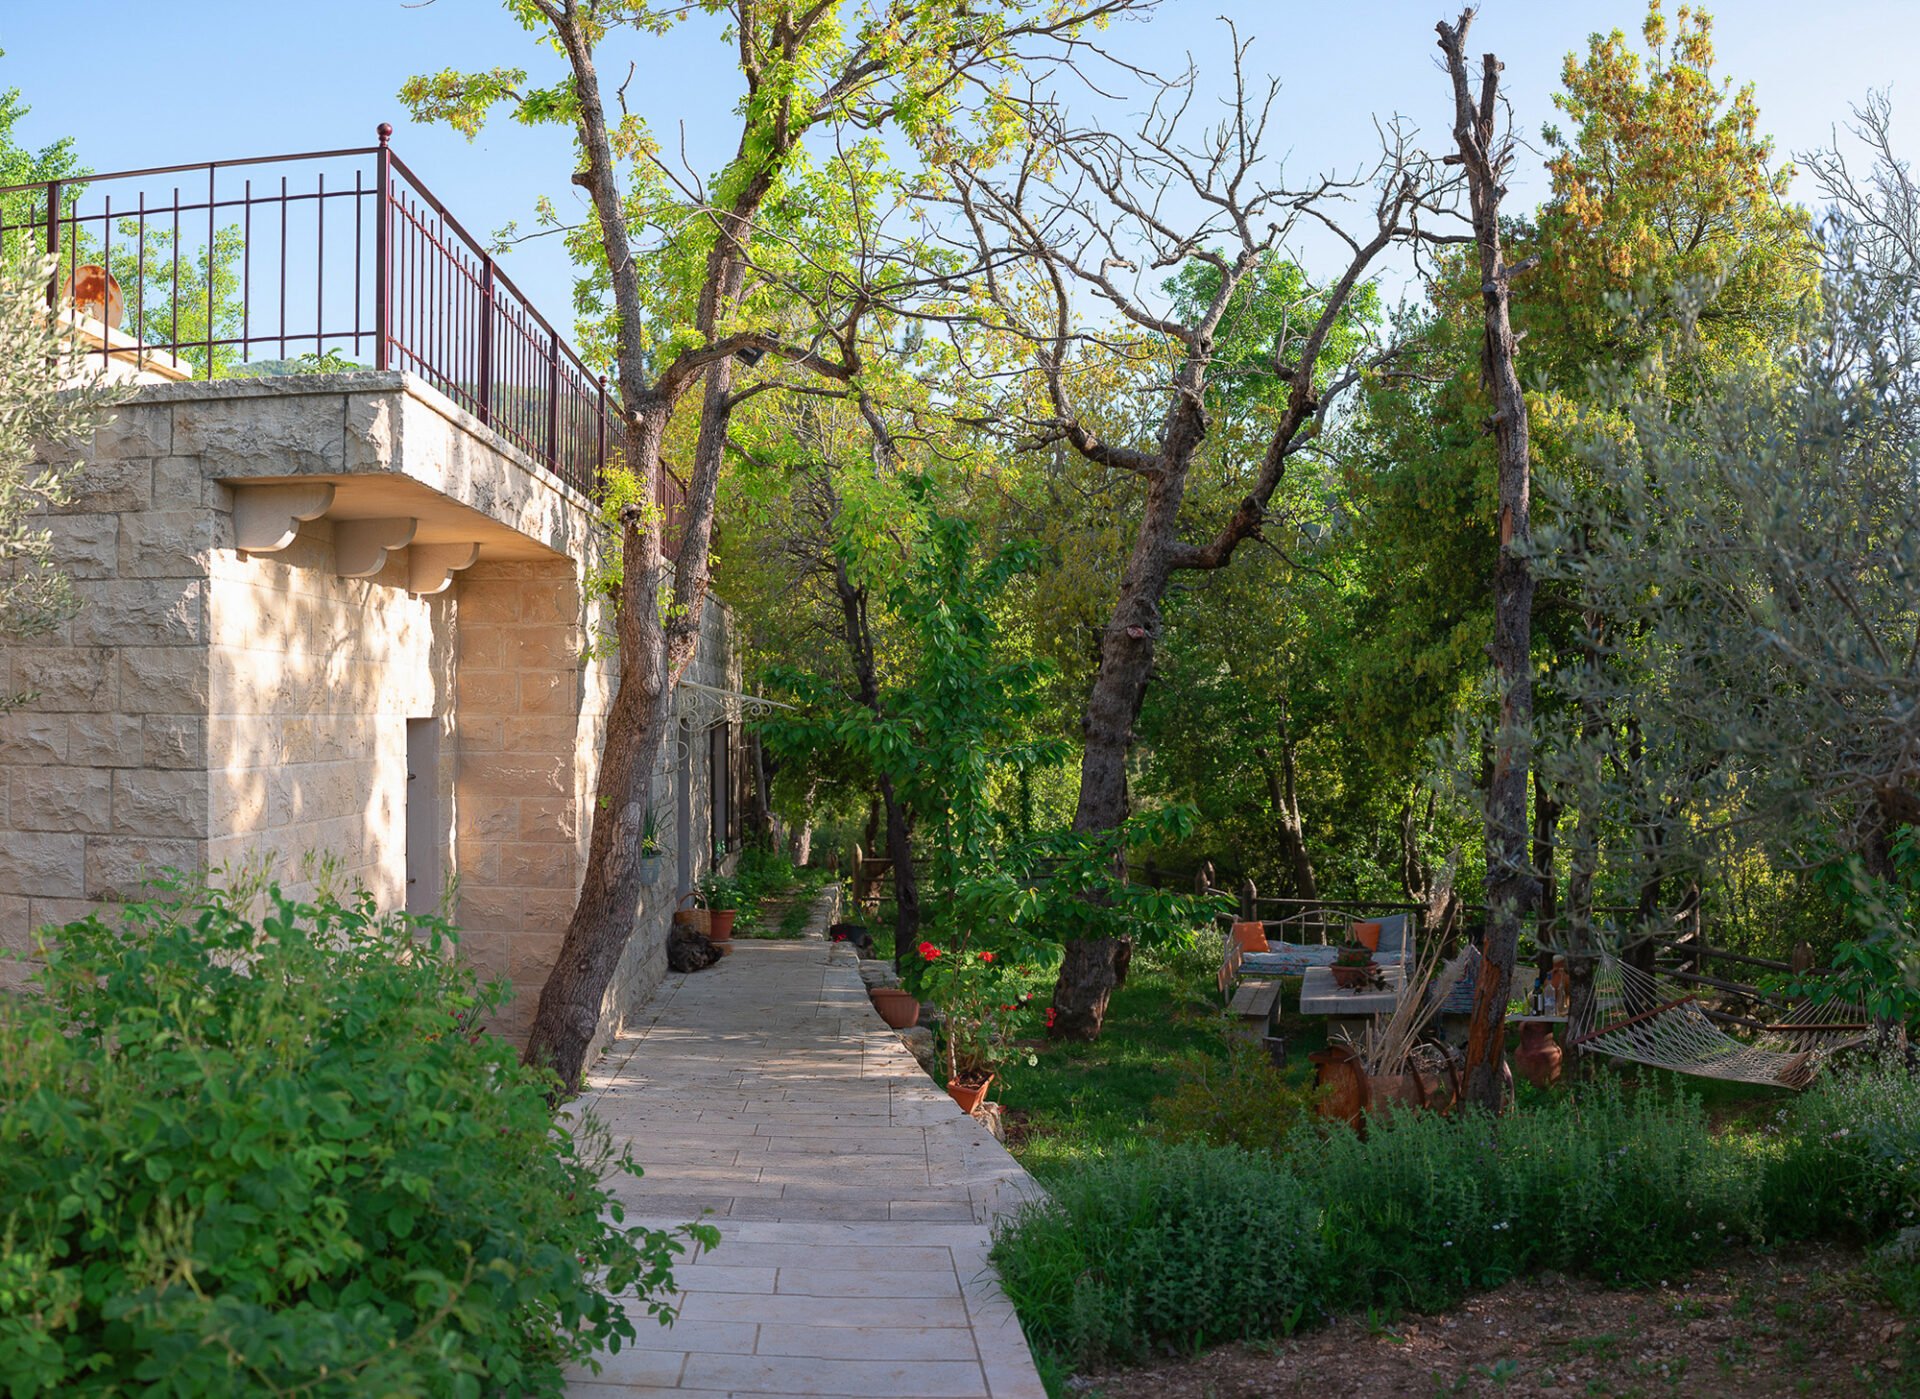 Rural guesthouses in Lebanon